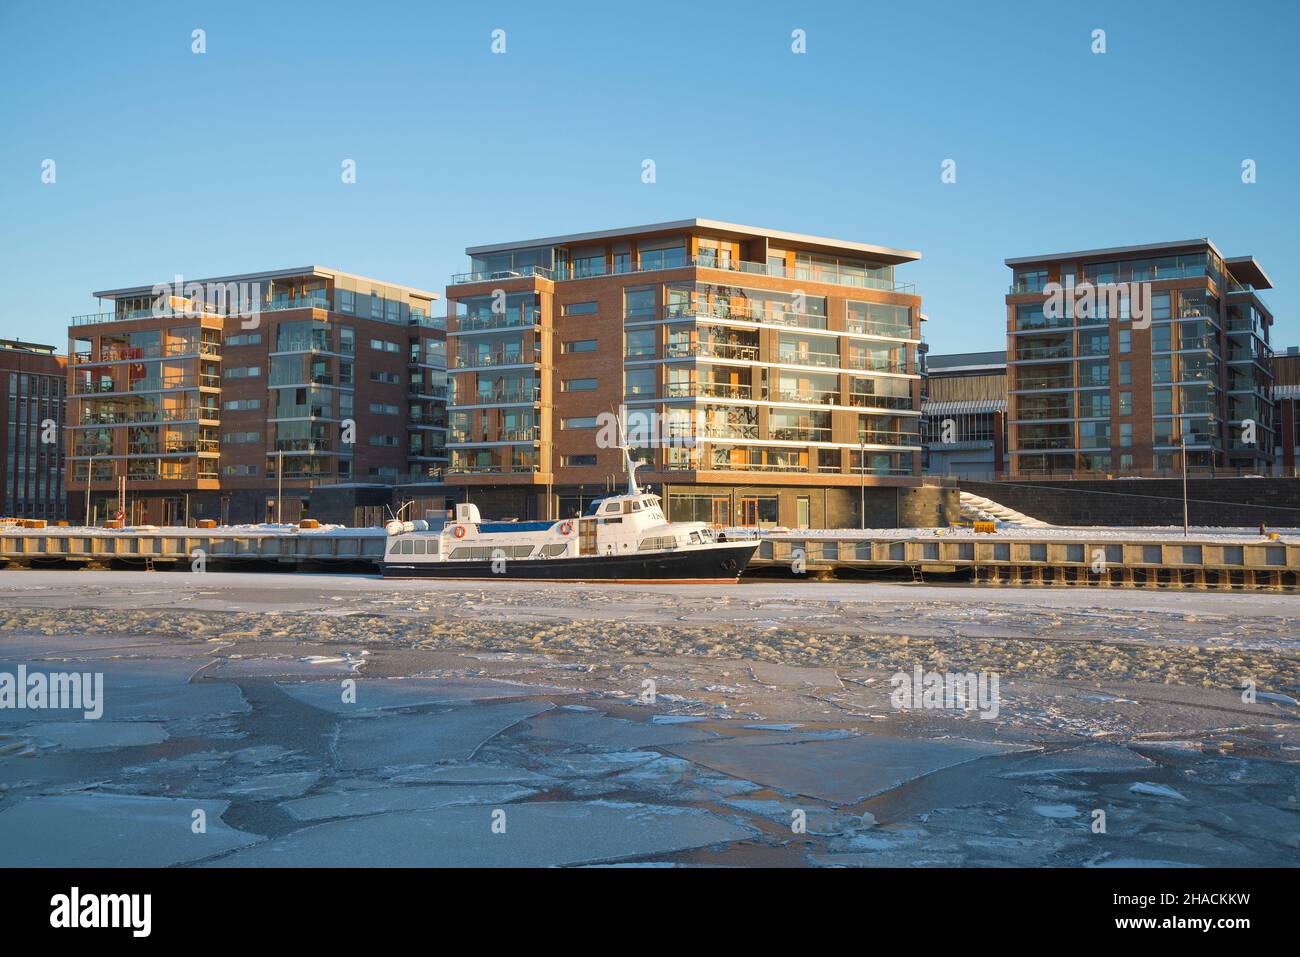 TURKU, FINLAND - FEBRUARY 23, 2018: Modern apartment buildings on the embankment of the Aurajoki river on a sunny February evening Stock Photo